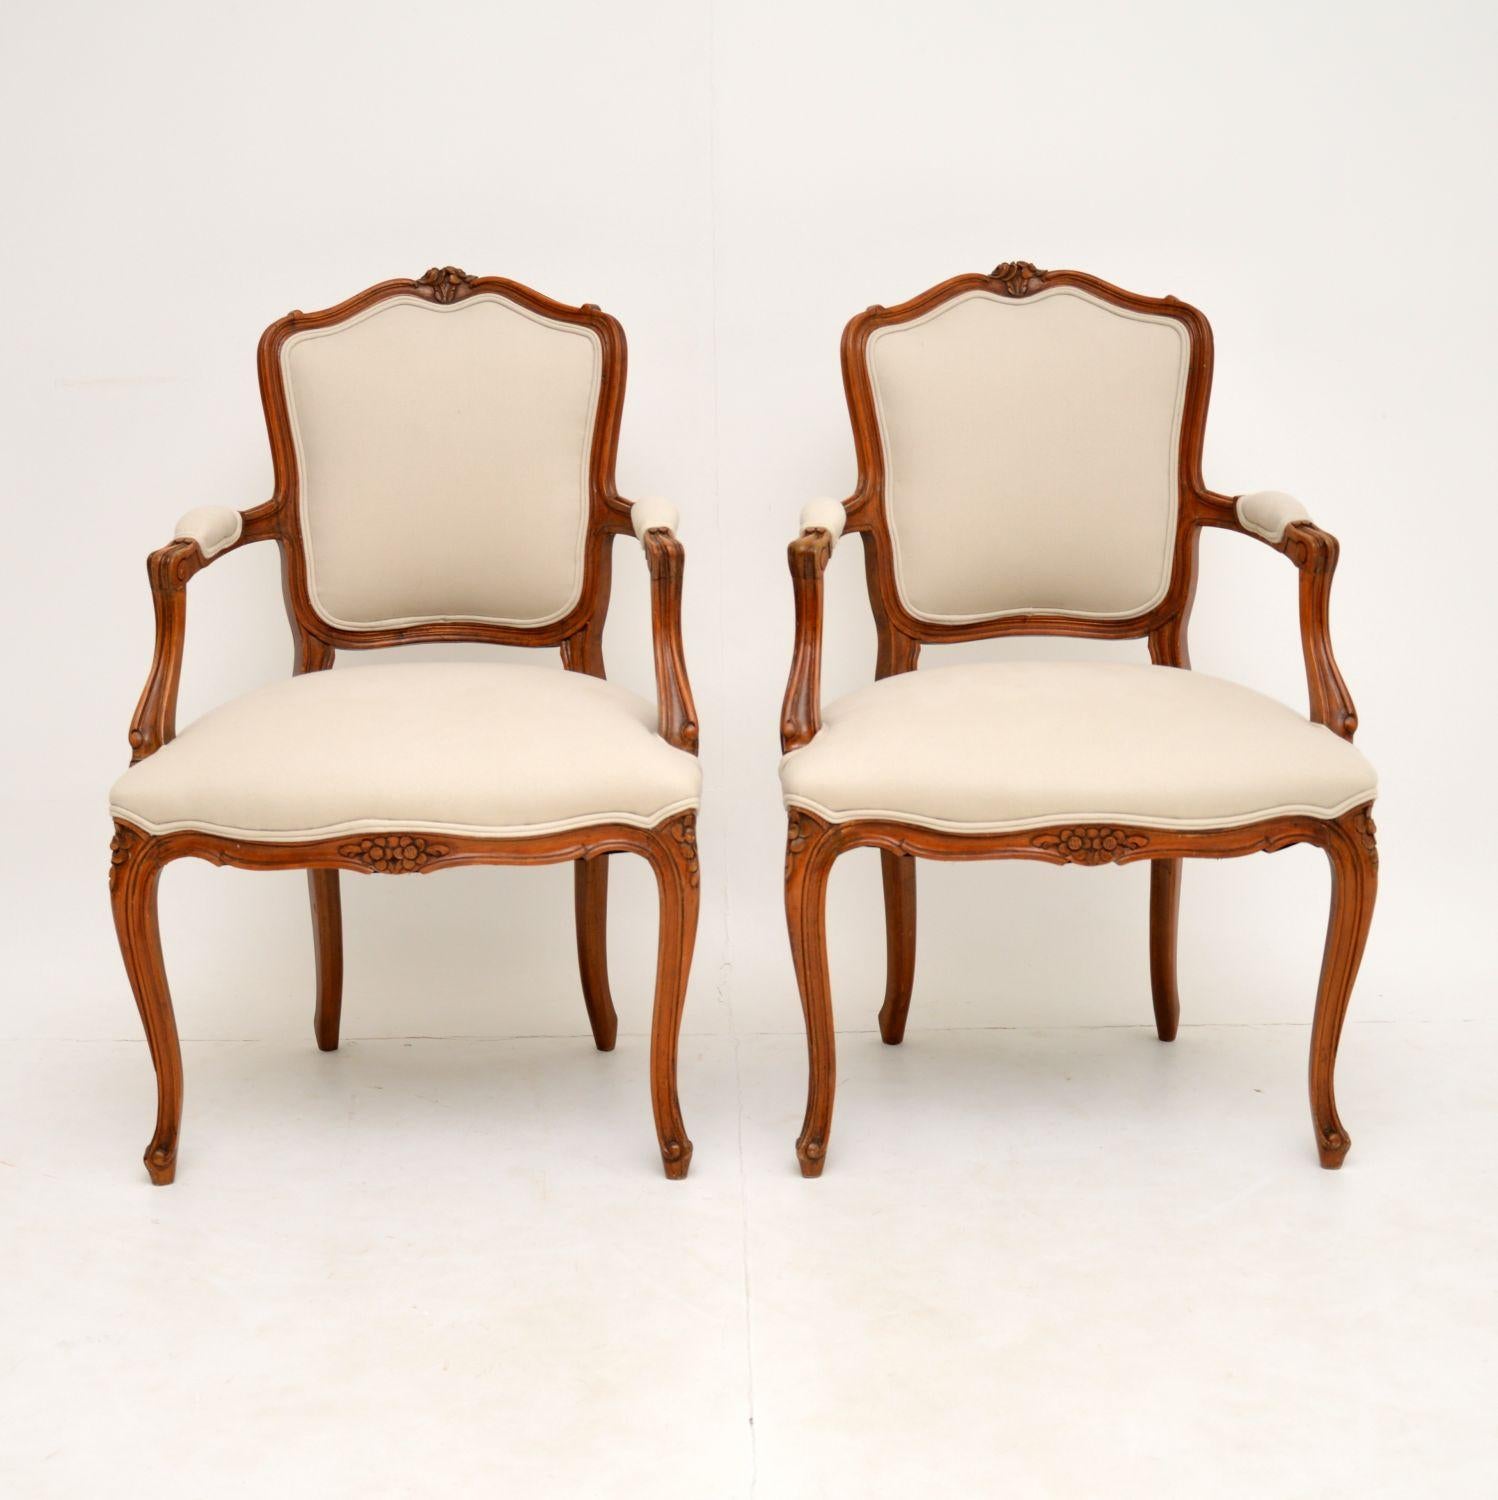 A beautiful pair of antique French salon armchairs, these date from around the 1920’s.

They are of excellent quality, and are made from solid walnut, with some intricate floral carvings around the frames. They are comfortable, sturdy and sound,